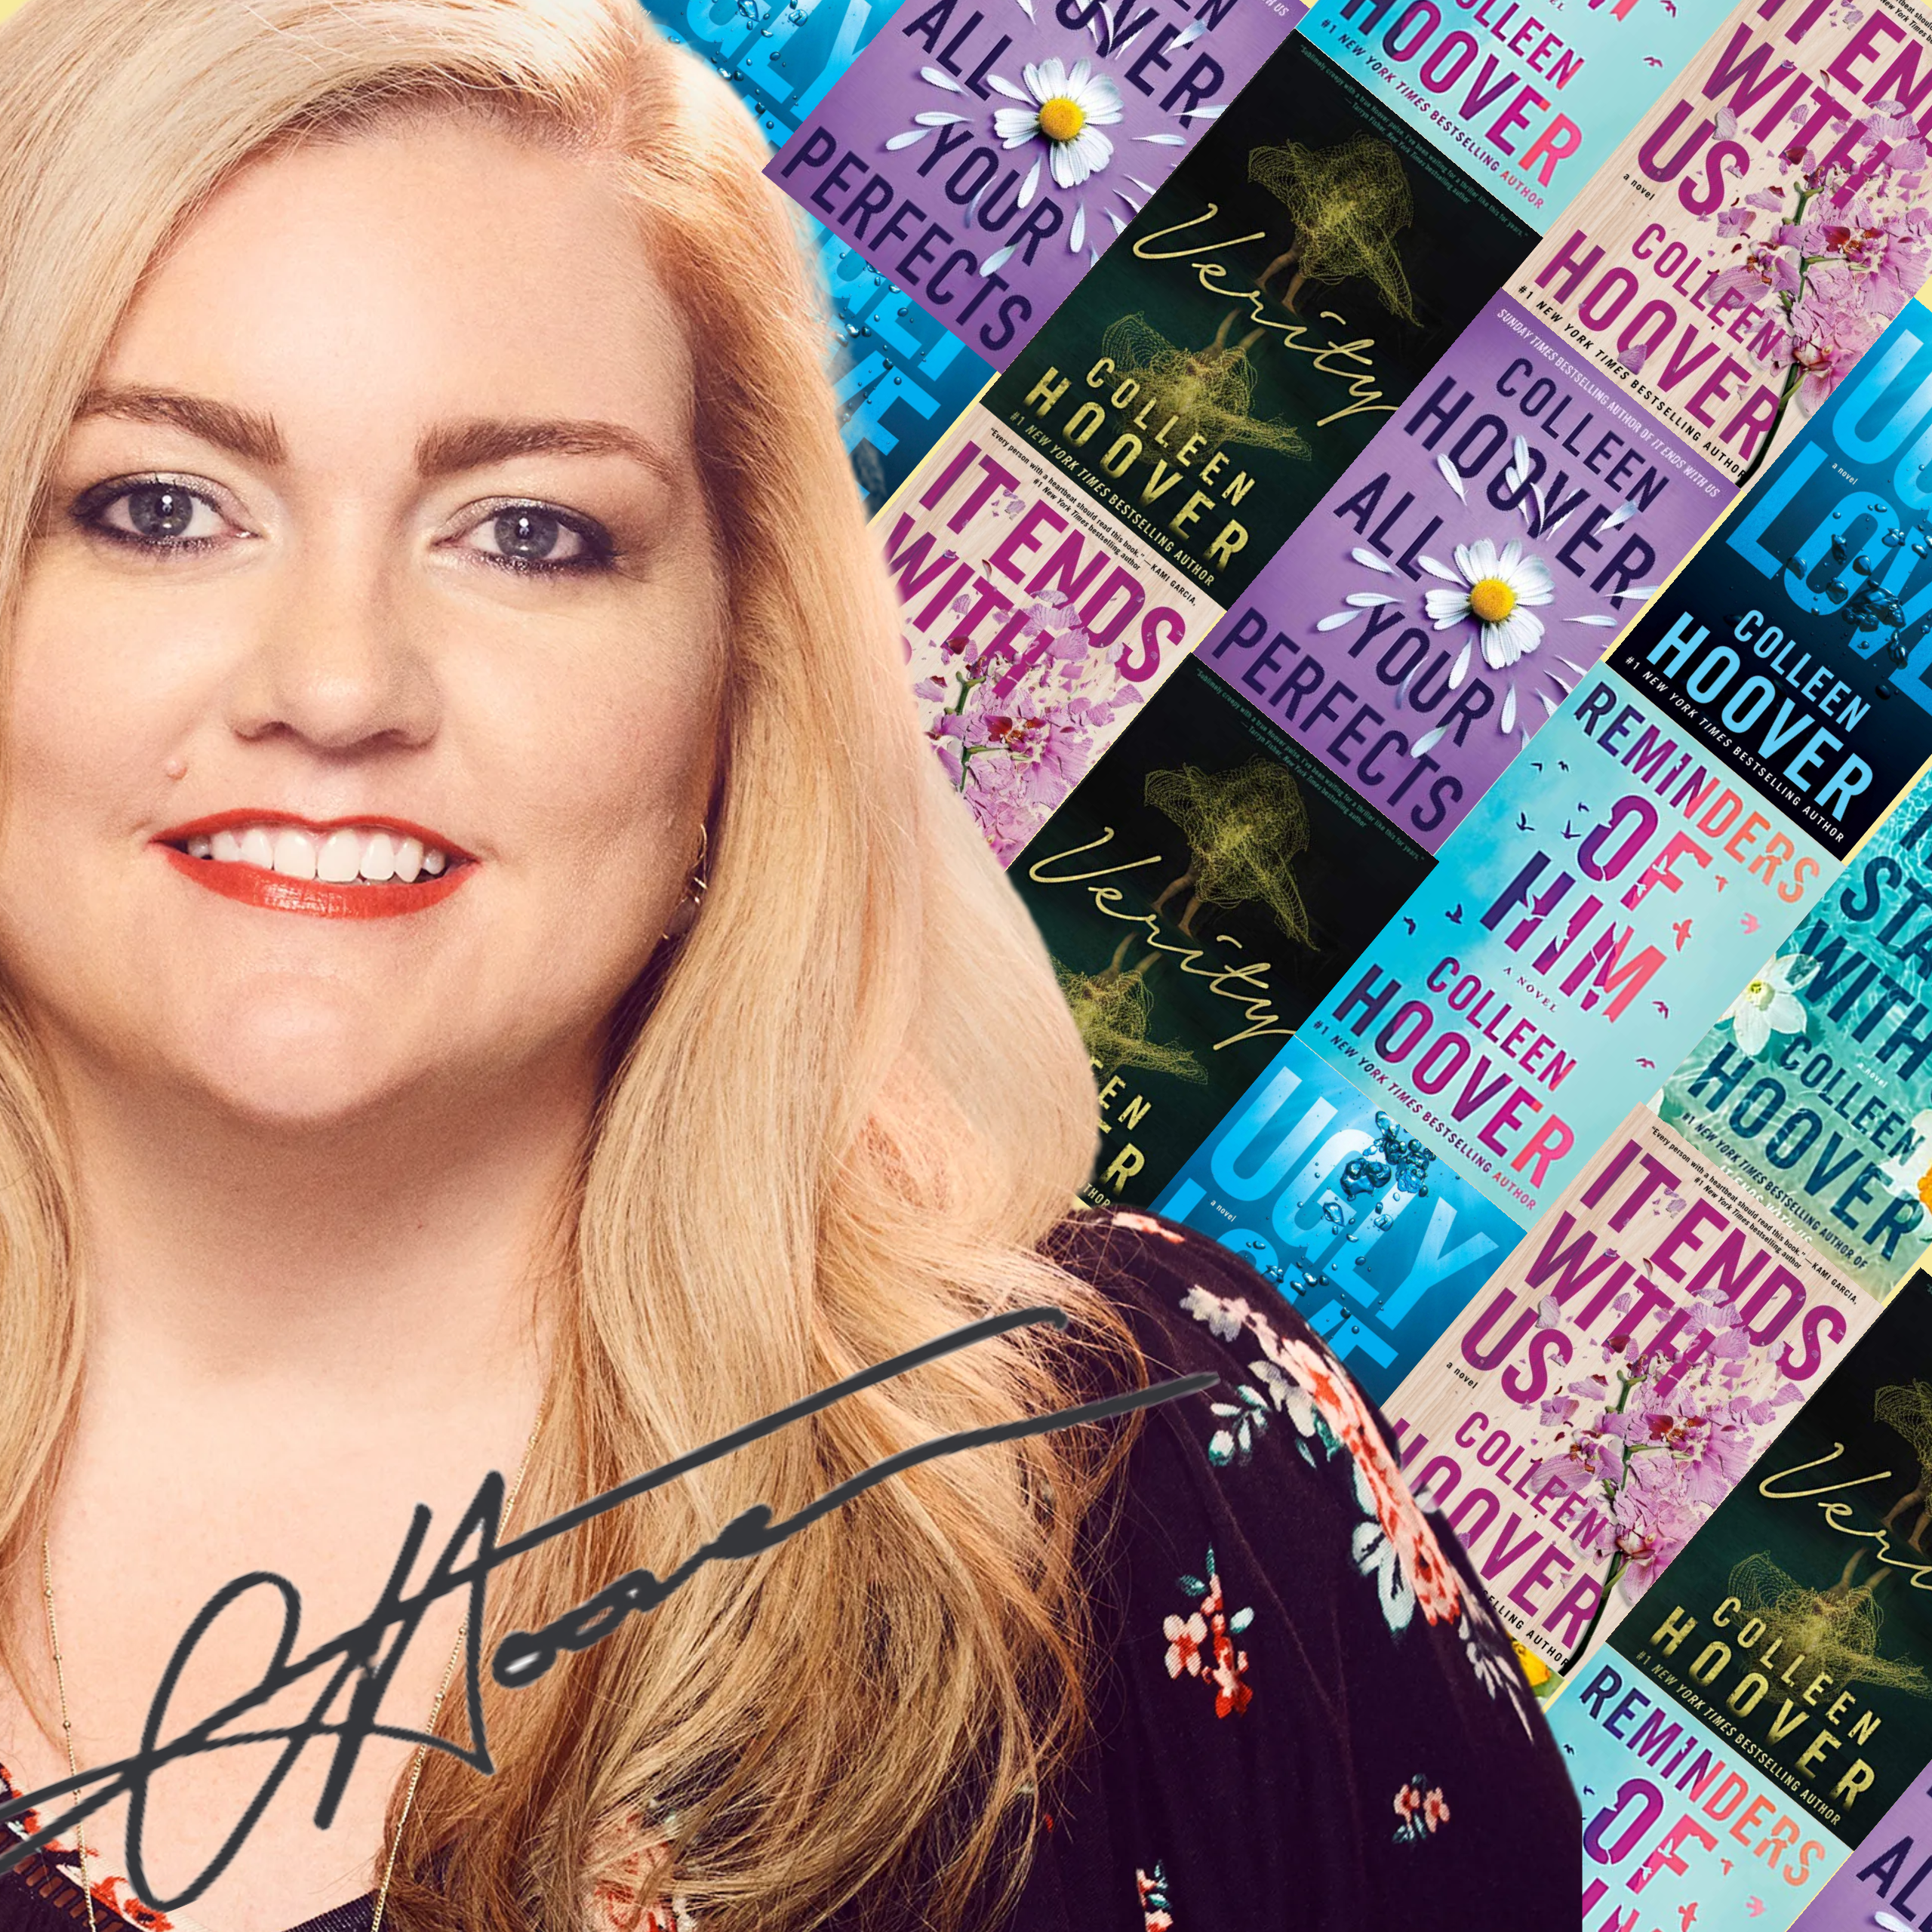 Colleen Hoover books: The author's success is due to much more than BookTok.